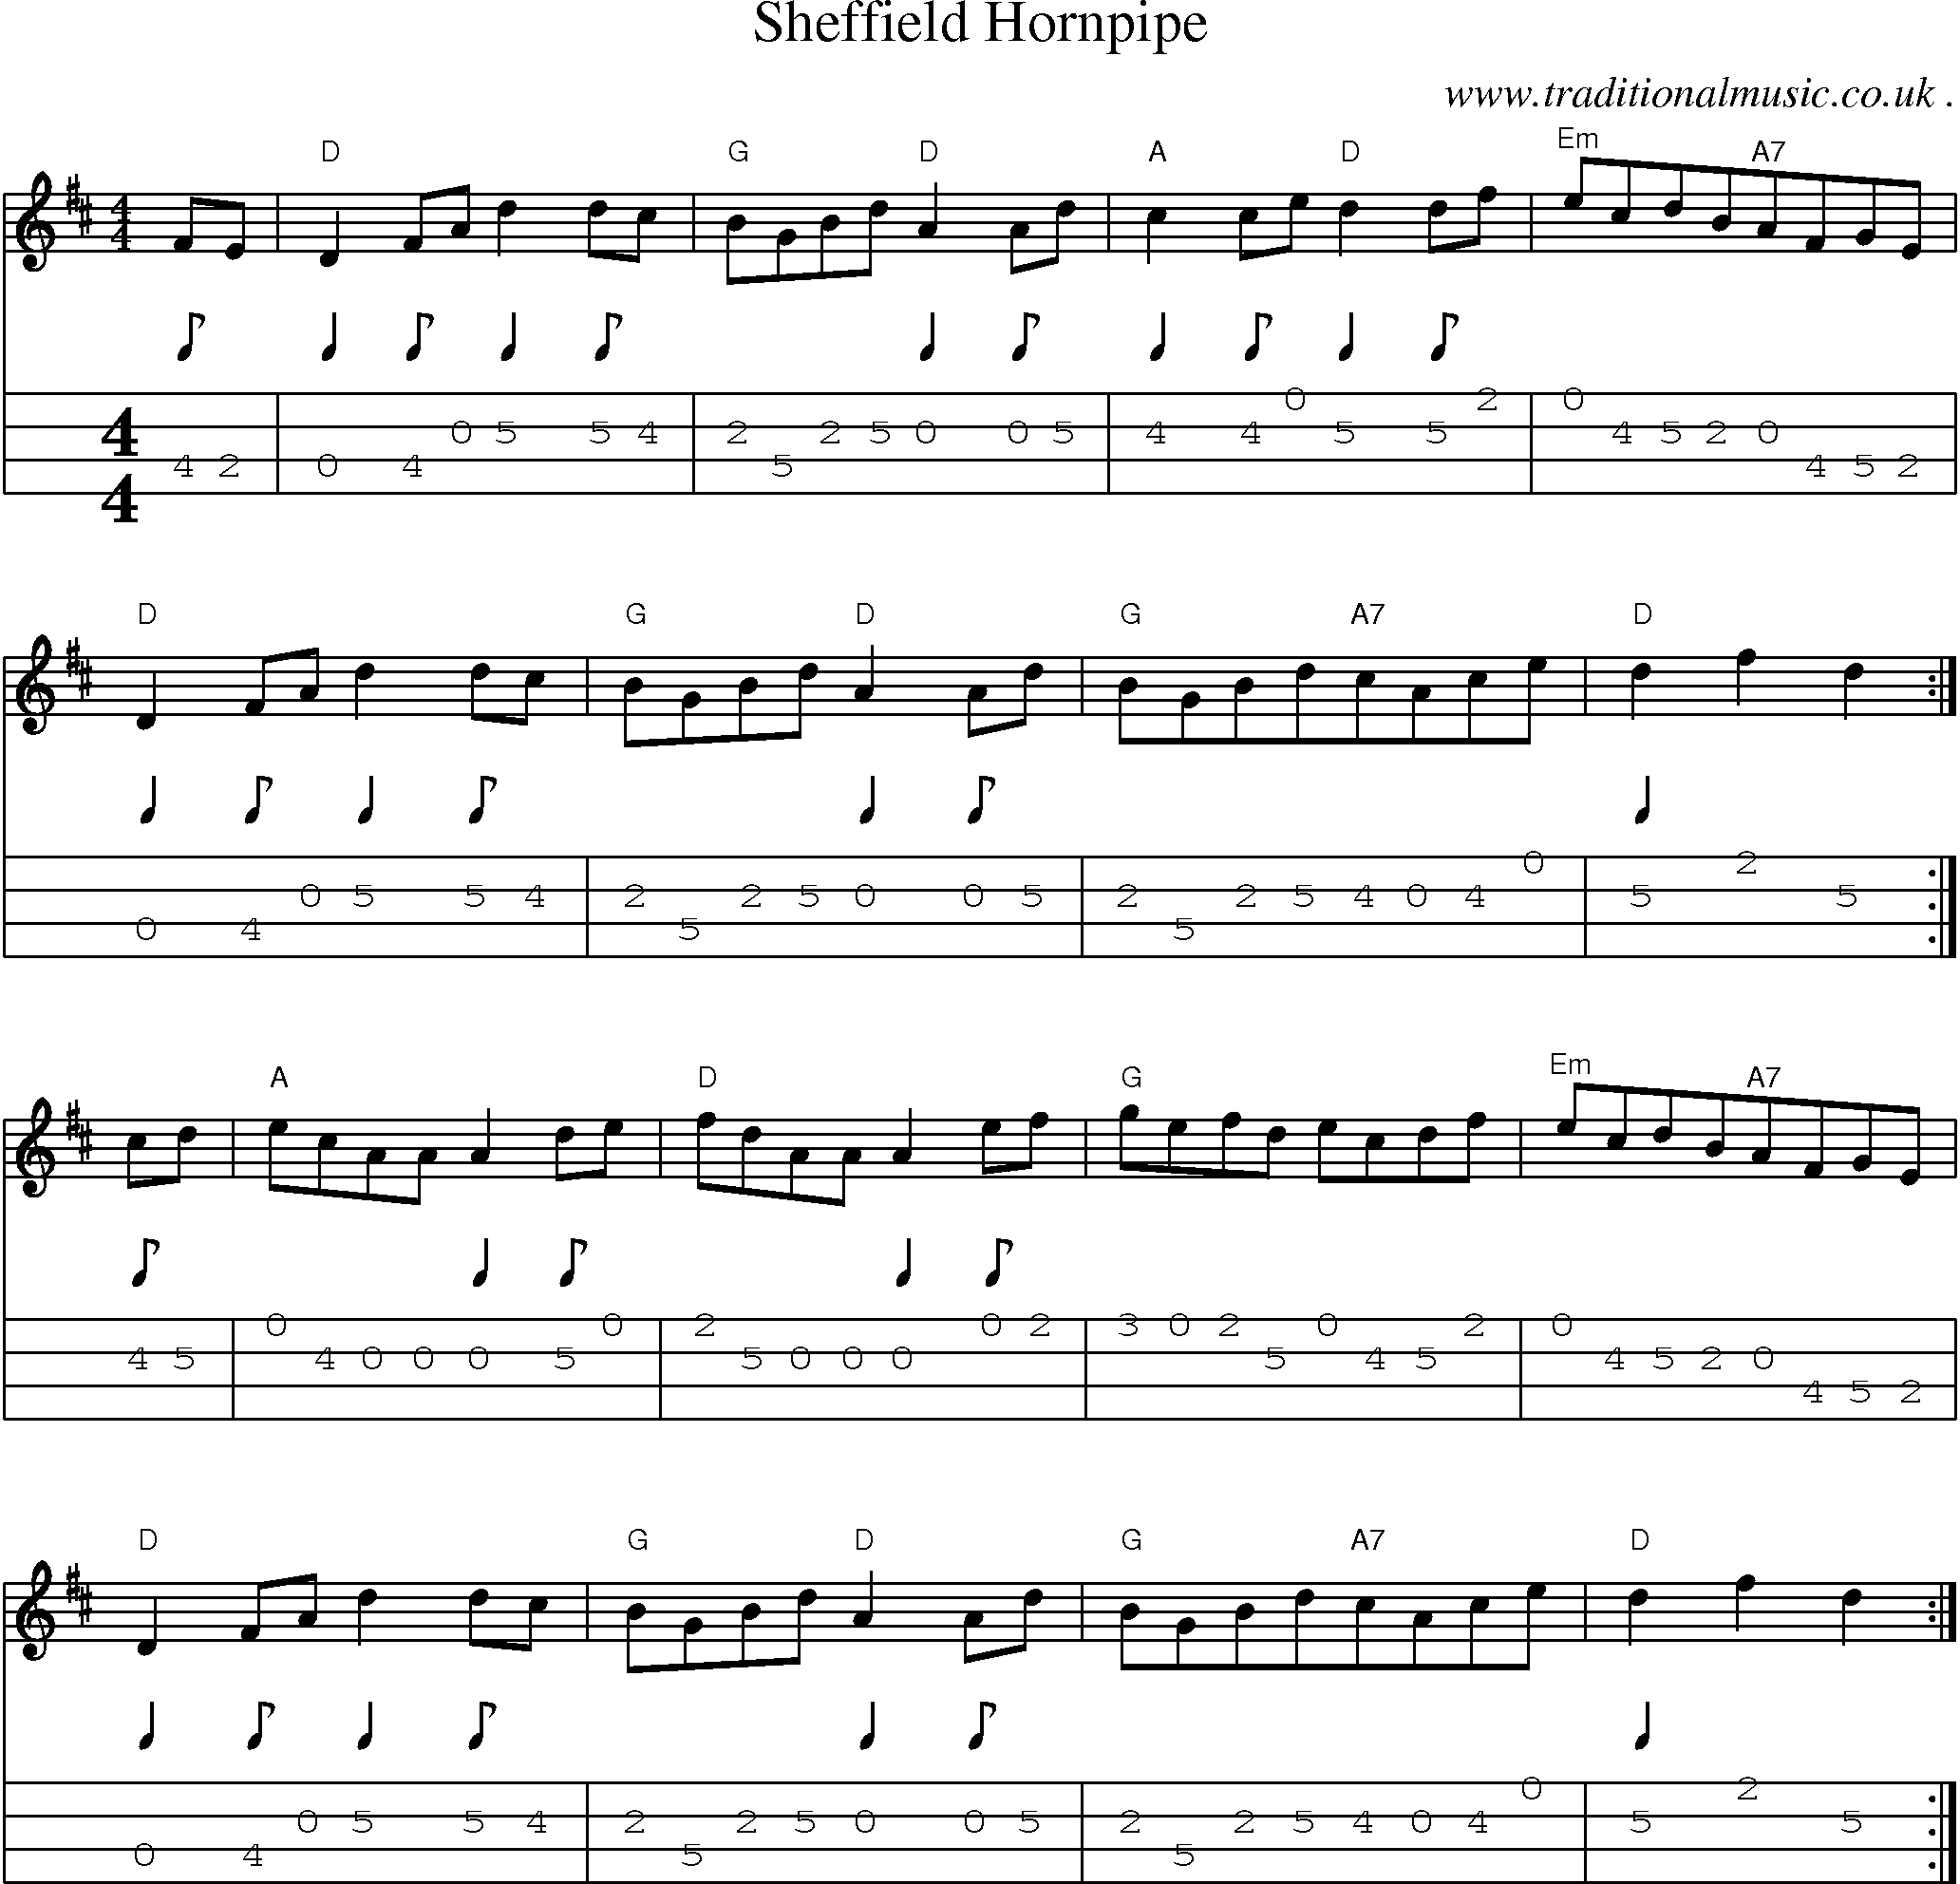 Sheet-Music and Mandolin Tabs for Sheffield Hornpipe